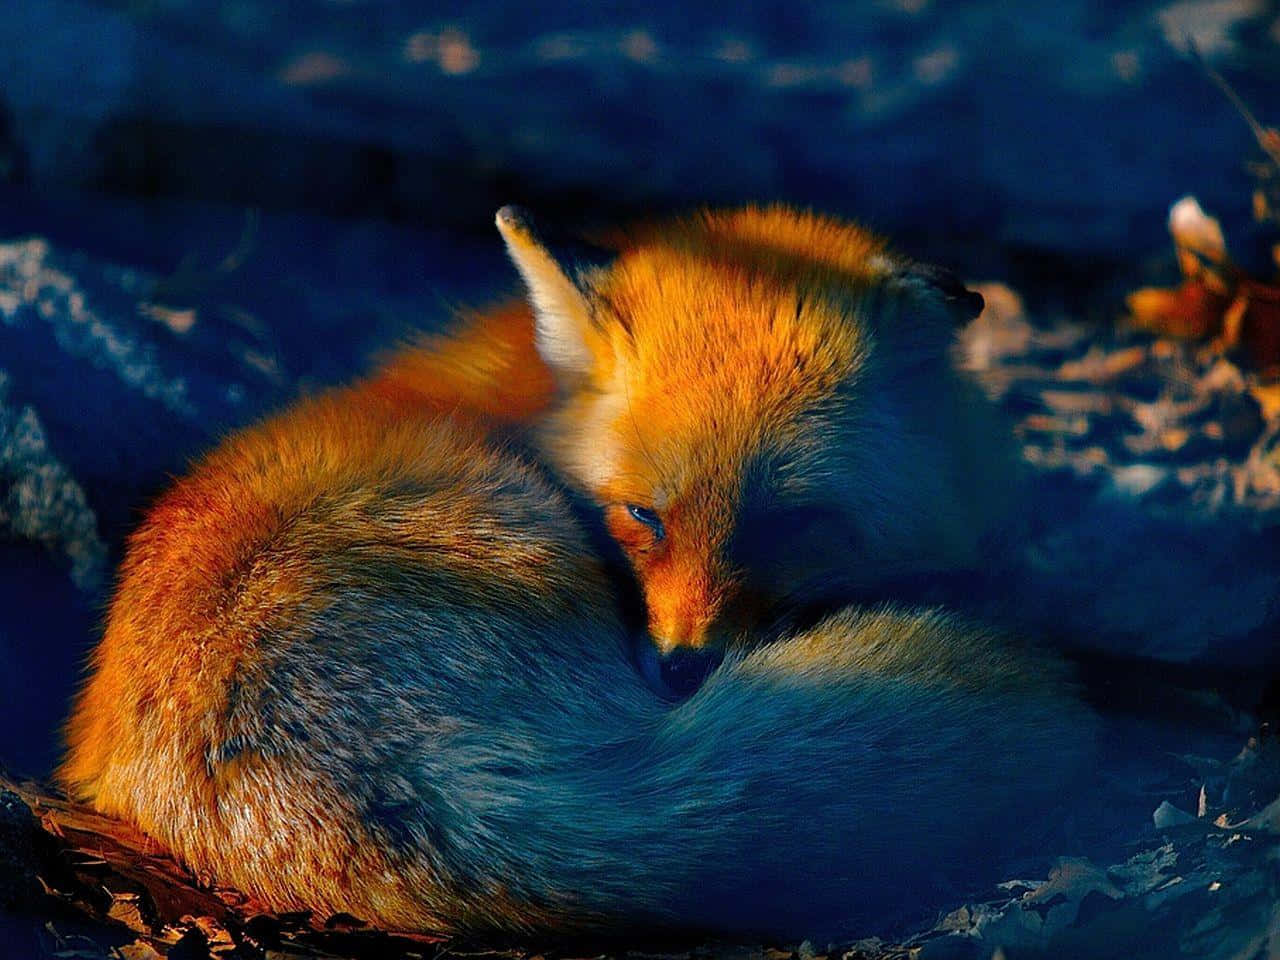 An Intriguingly Colorful Fox Wallpaper